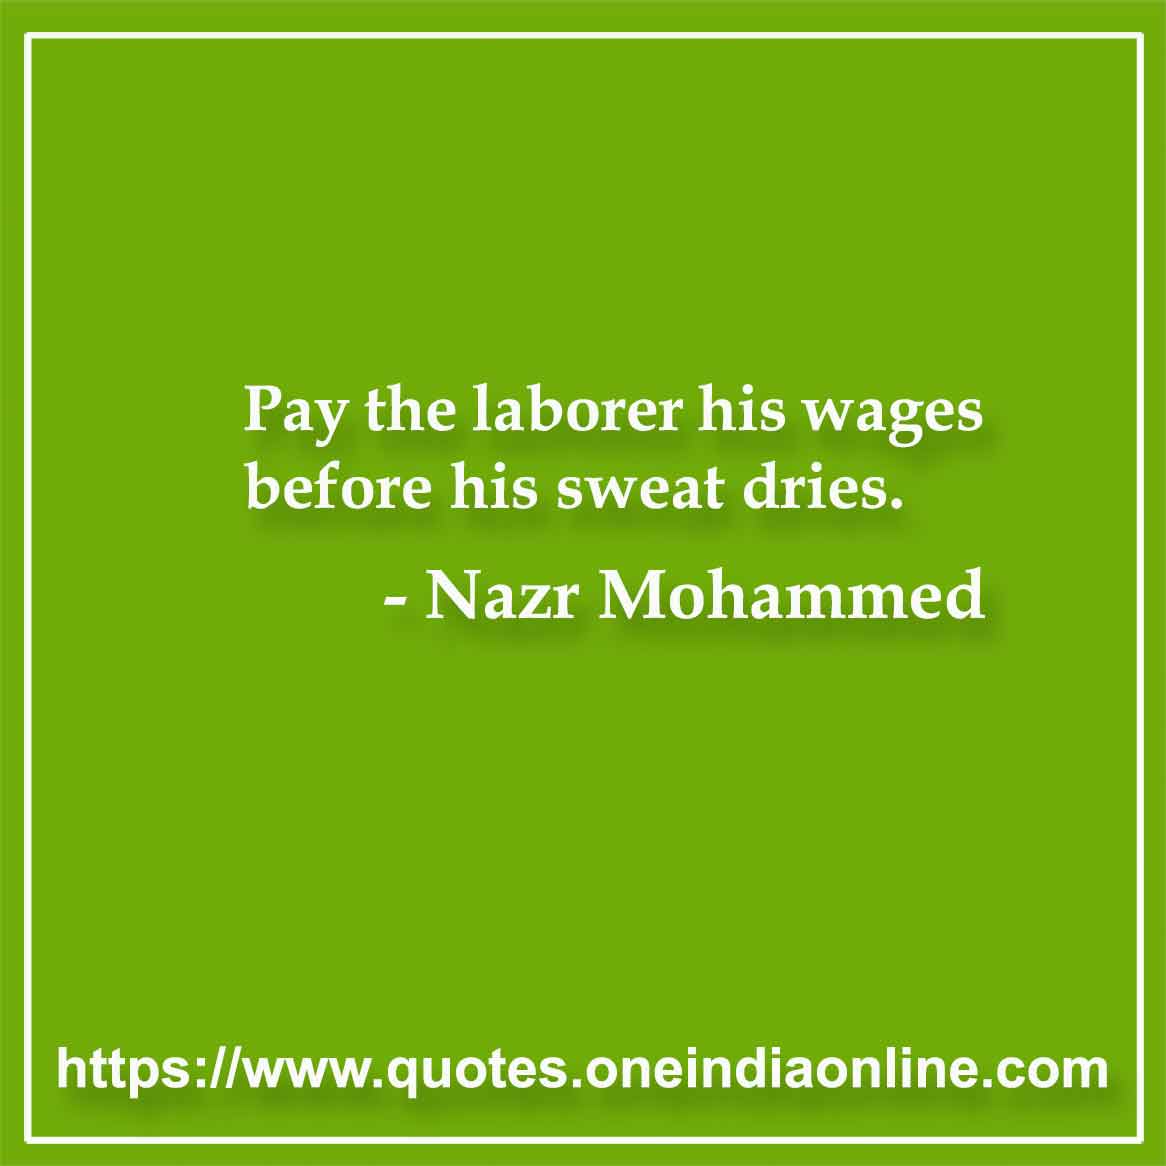 Pay the laborer his wages before his sweat dries.

Nazr Mohammed